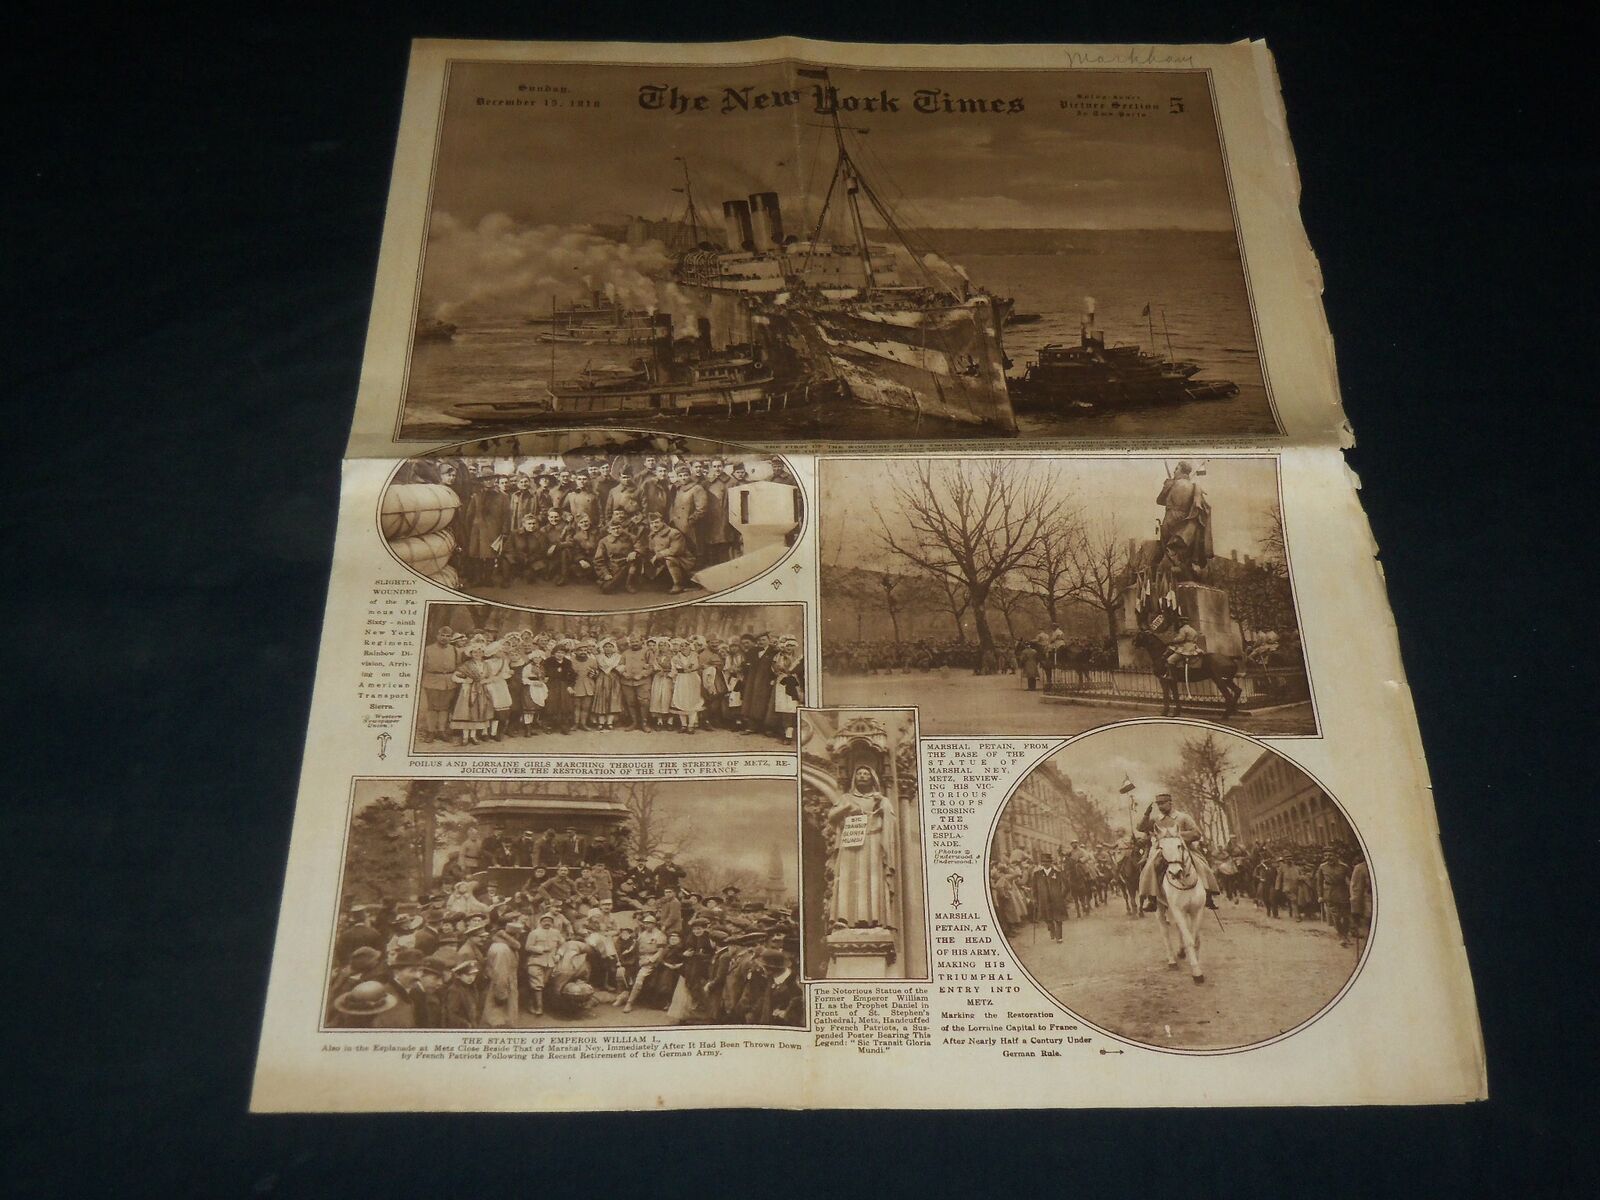 1918 DECEMBER 15 NEW YORK TIMES PICTURE SECTION - 27TH DIVISION HOME - NP 5459